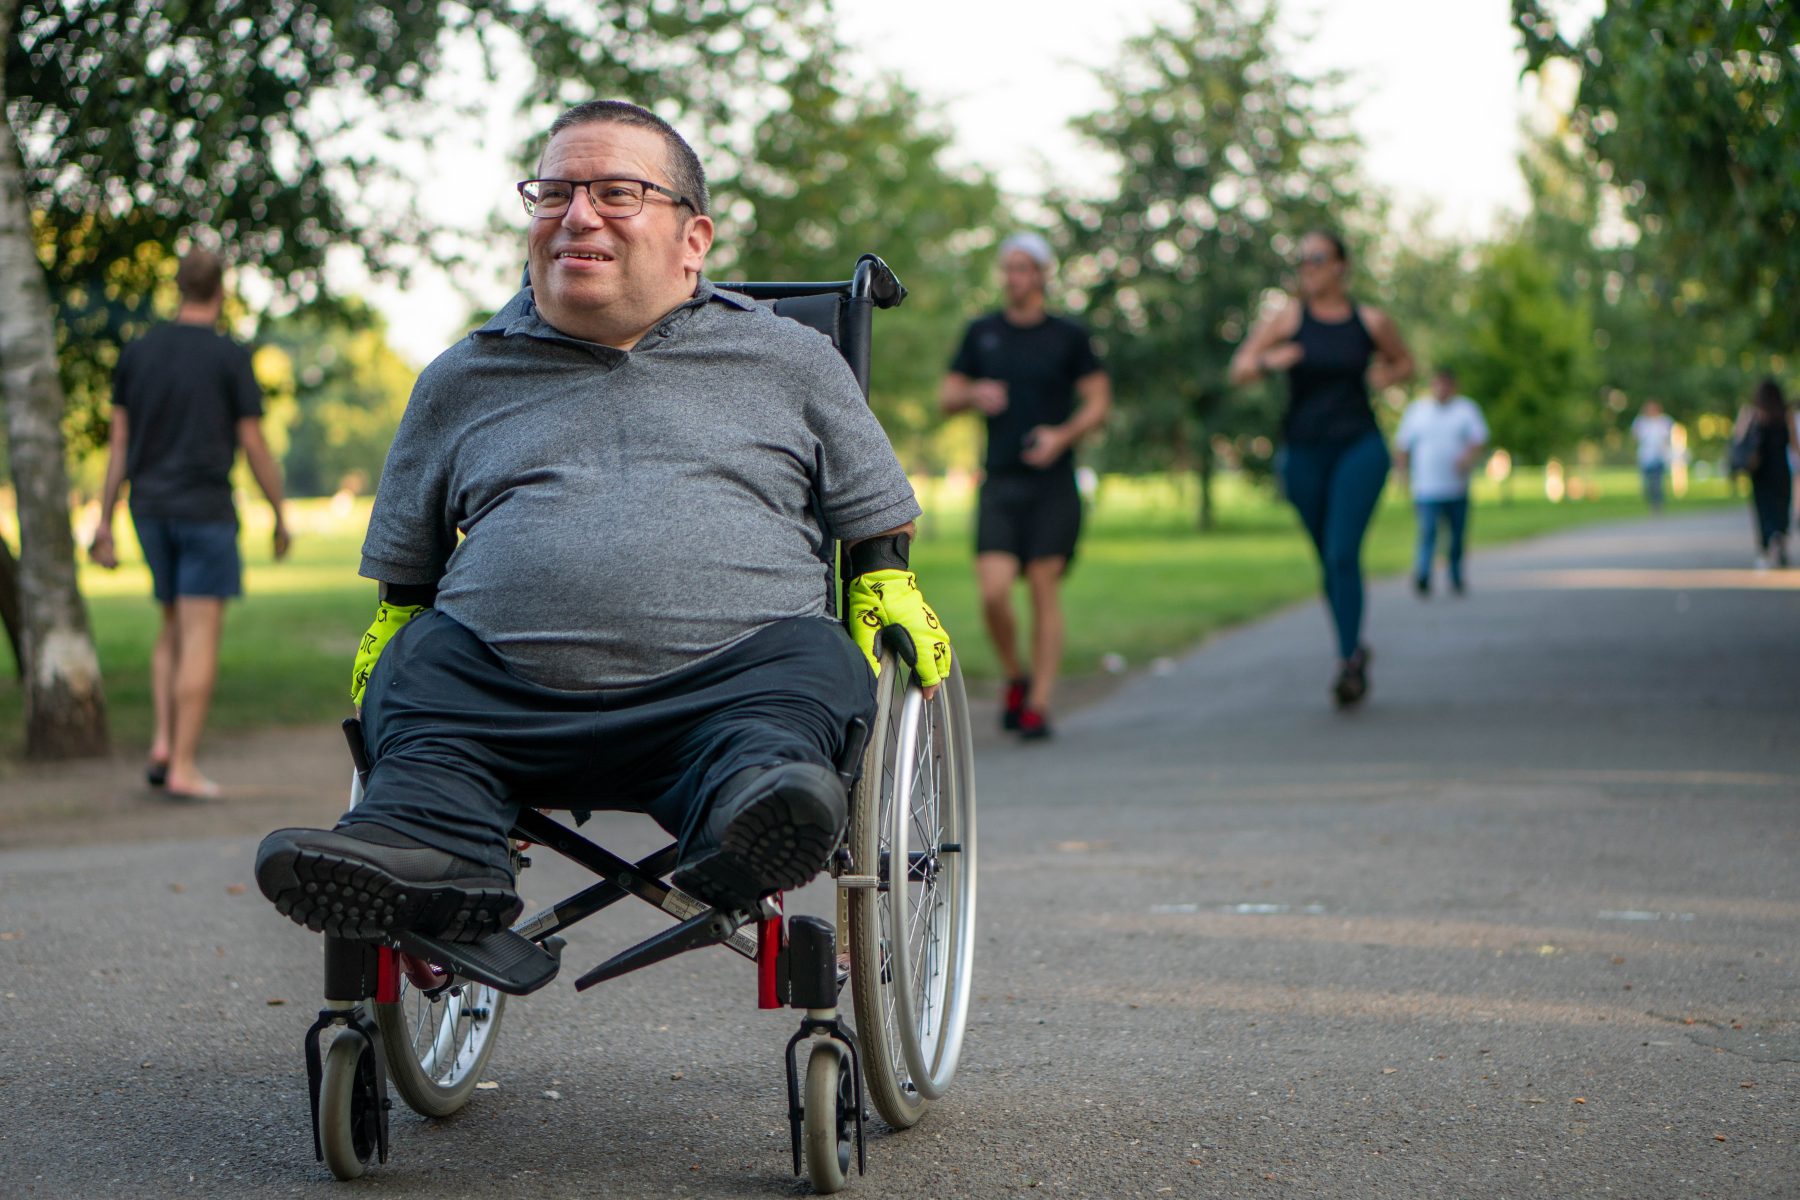 Man smiling in wheelchair ambulating in a part.